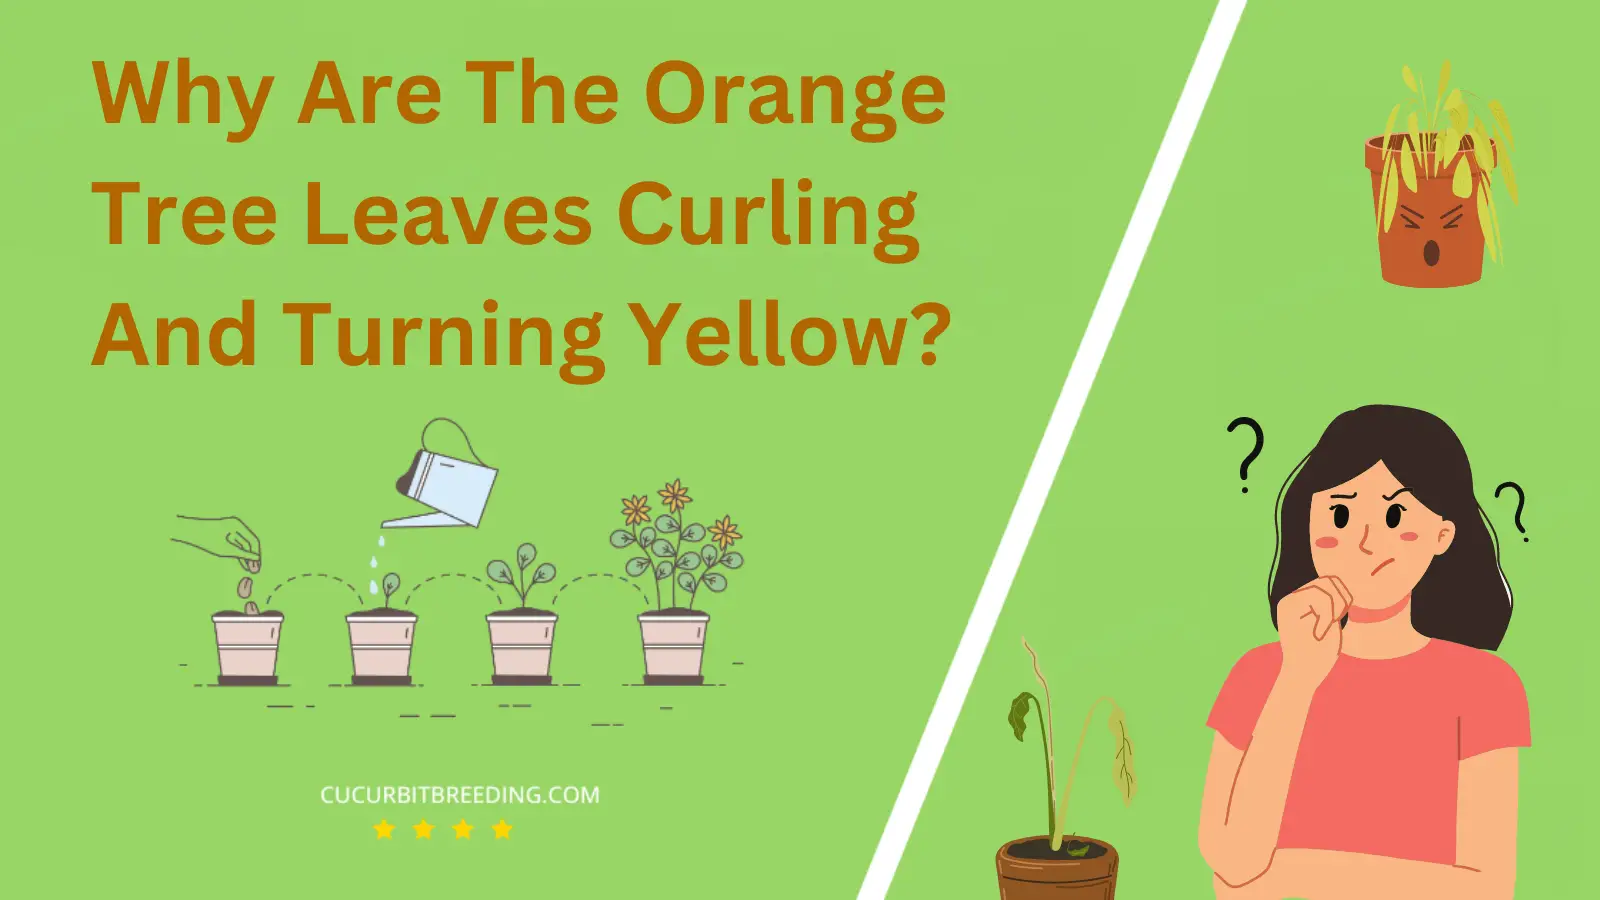 Why Are The Orange Tree Leaves Curling And Turning Yellow